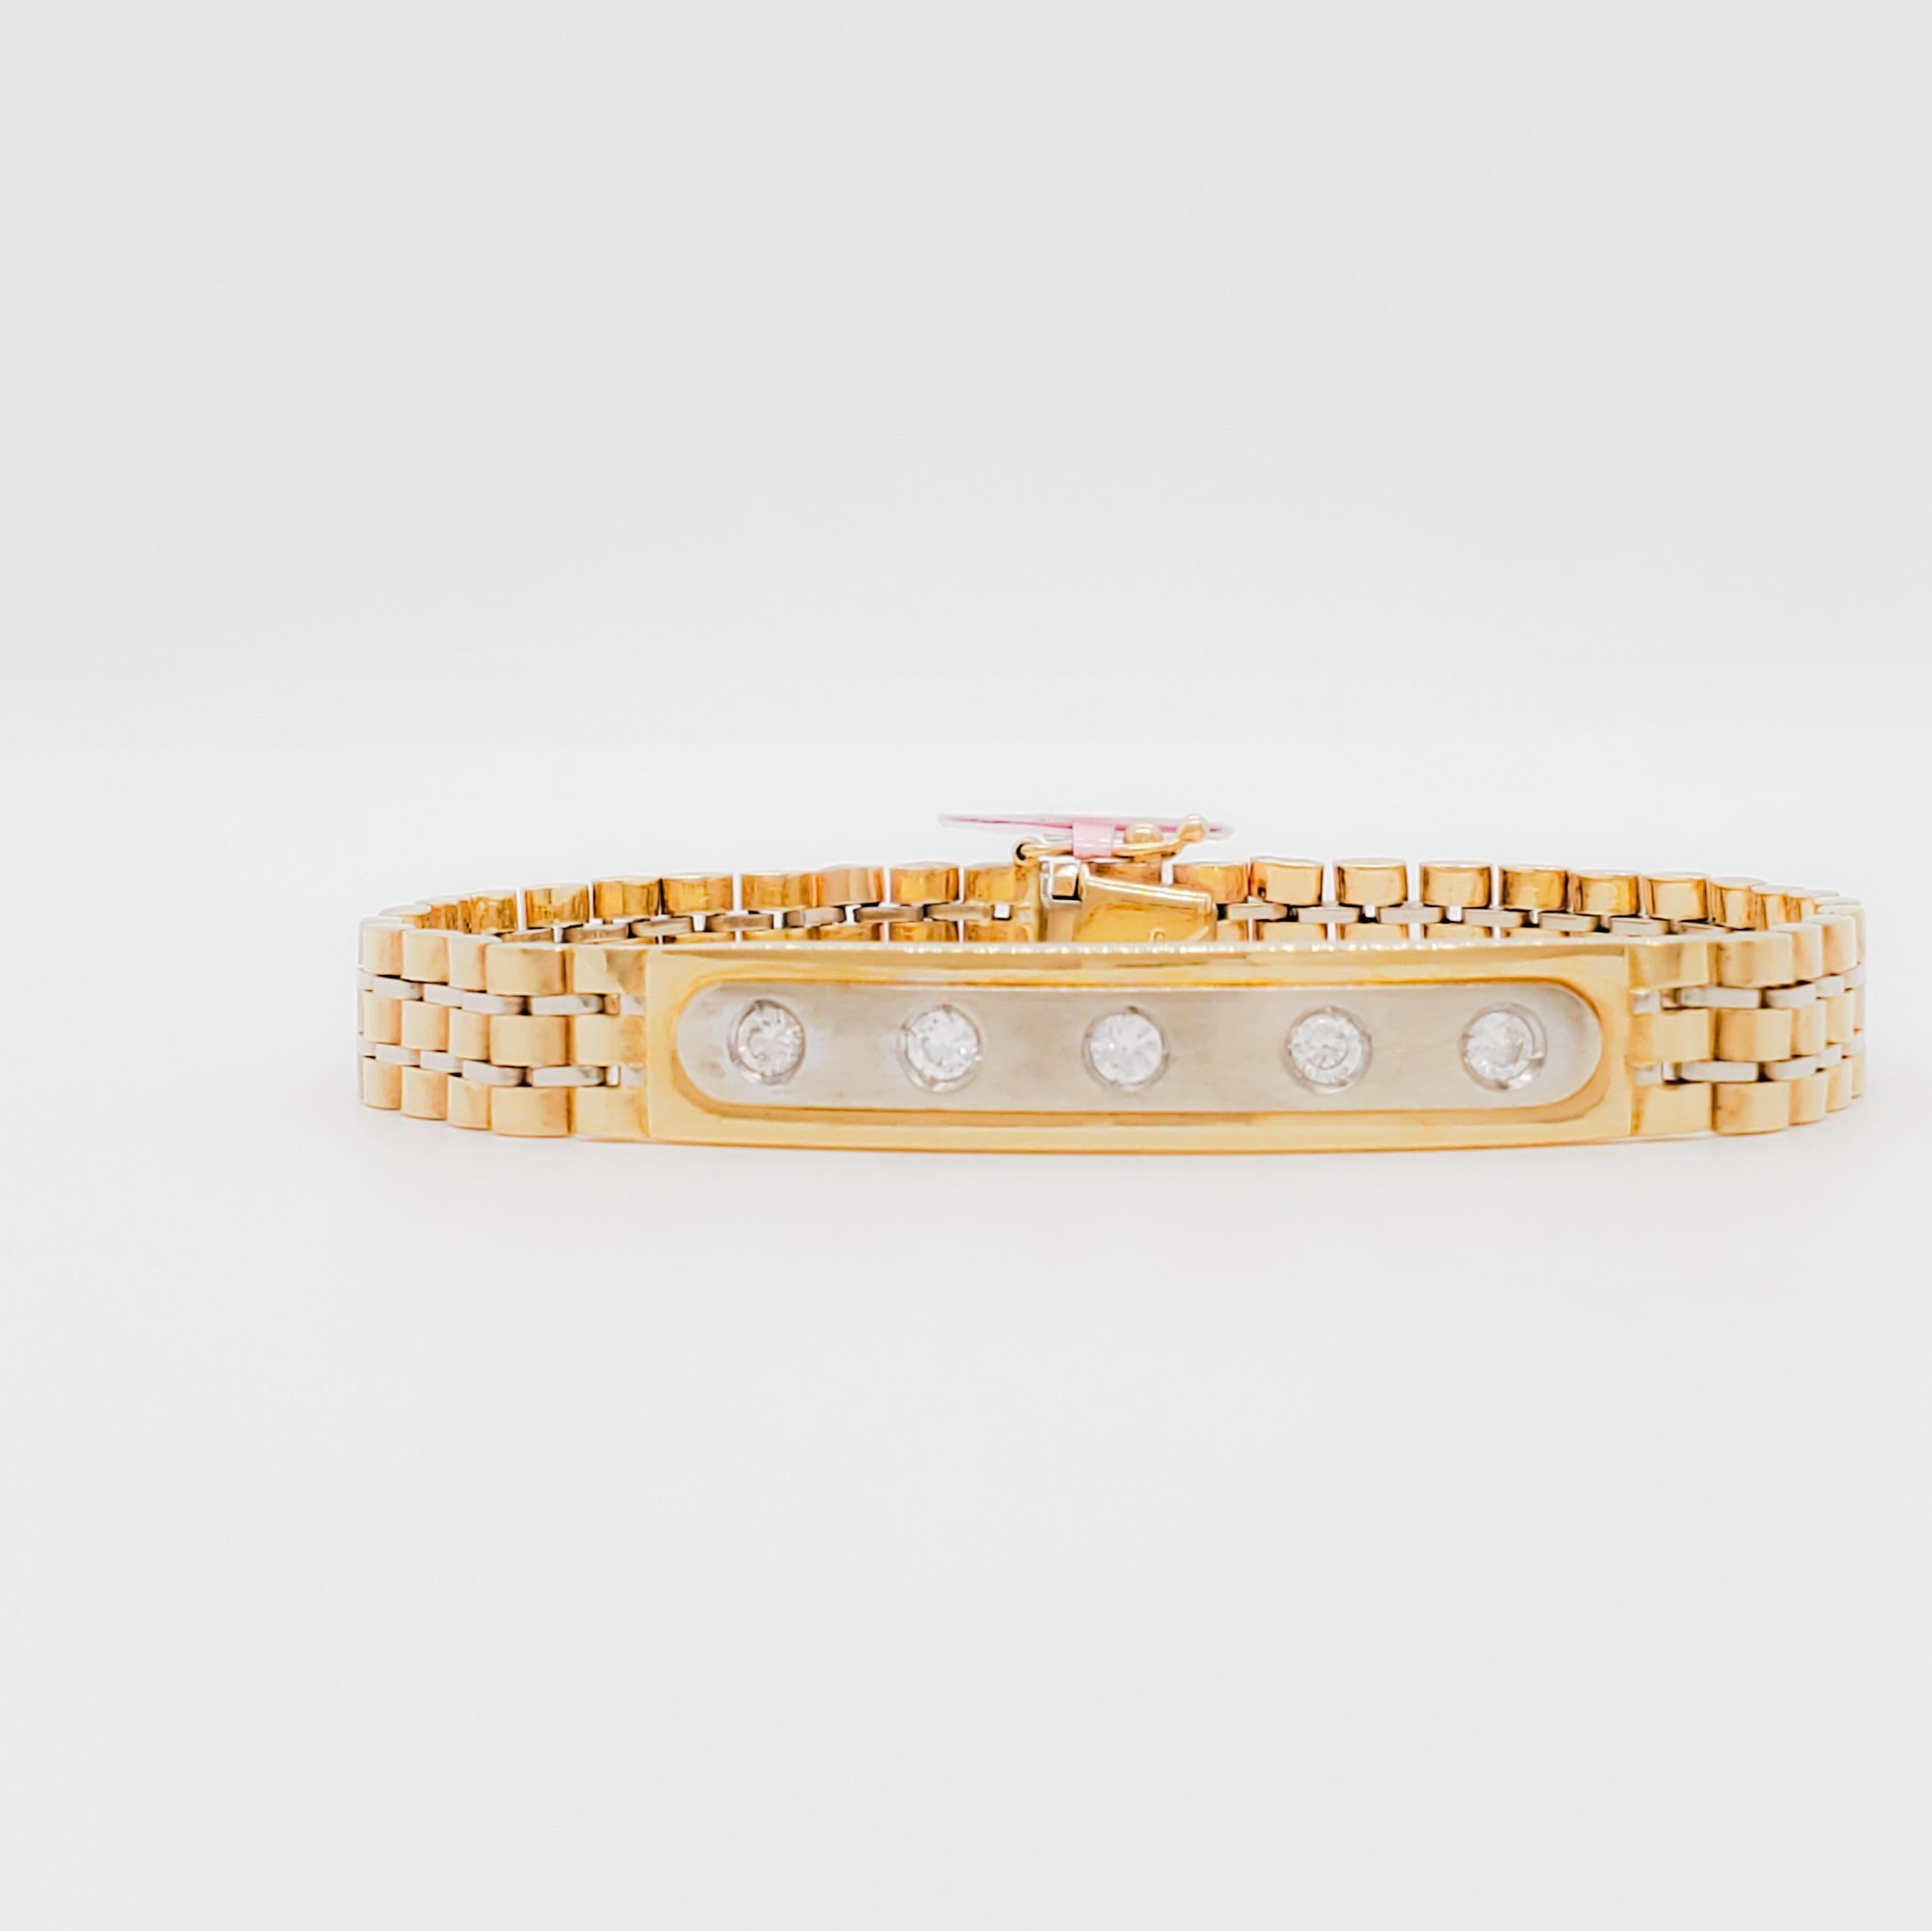 Beautiful bracelet with 0.60 ct. white diamond rounds (5 stones) handmade in 14k white and yellow gold.  